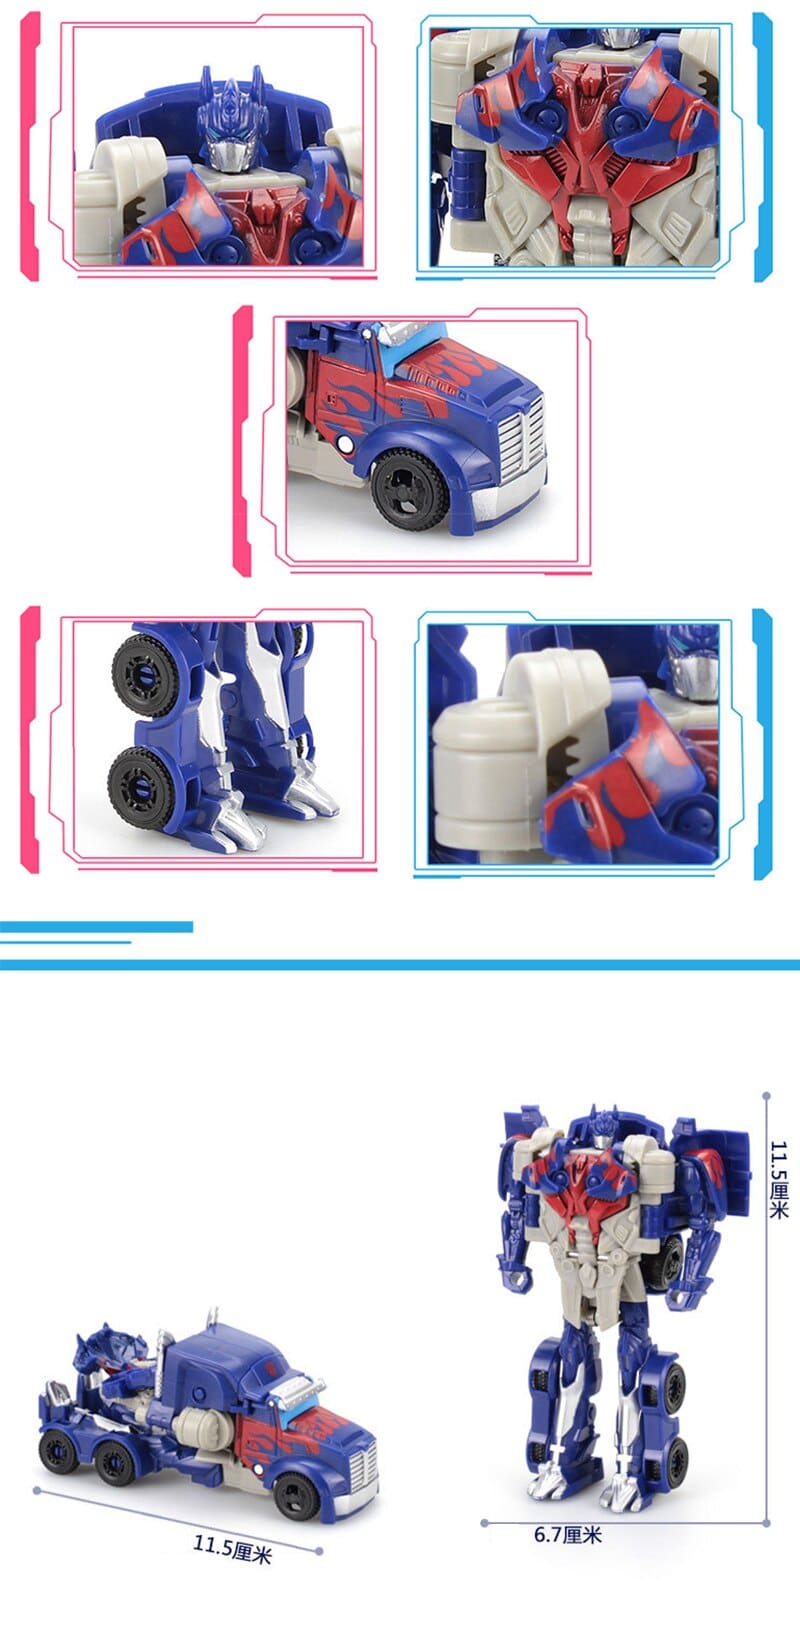 12cm Transformers Robots Kit Toy for Boy Gift